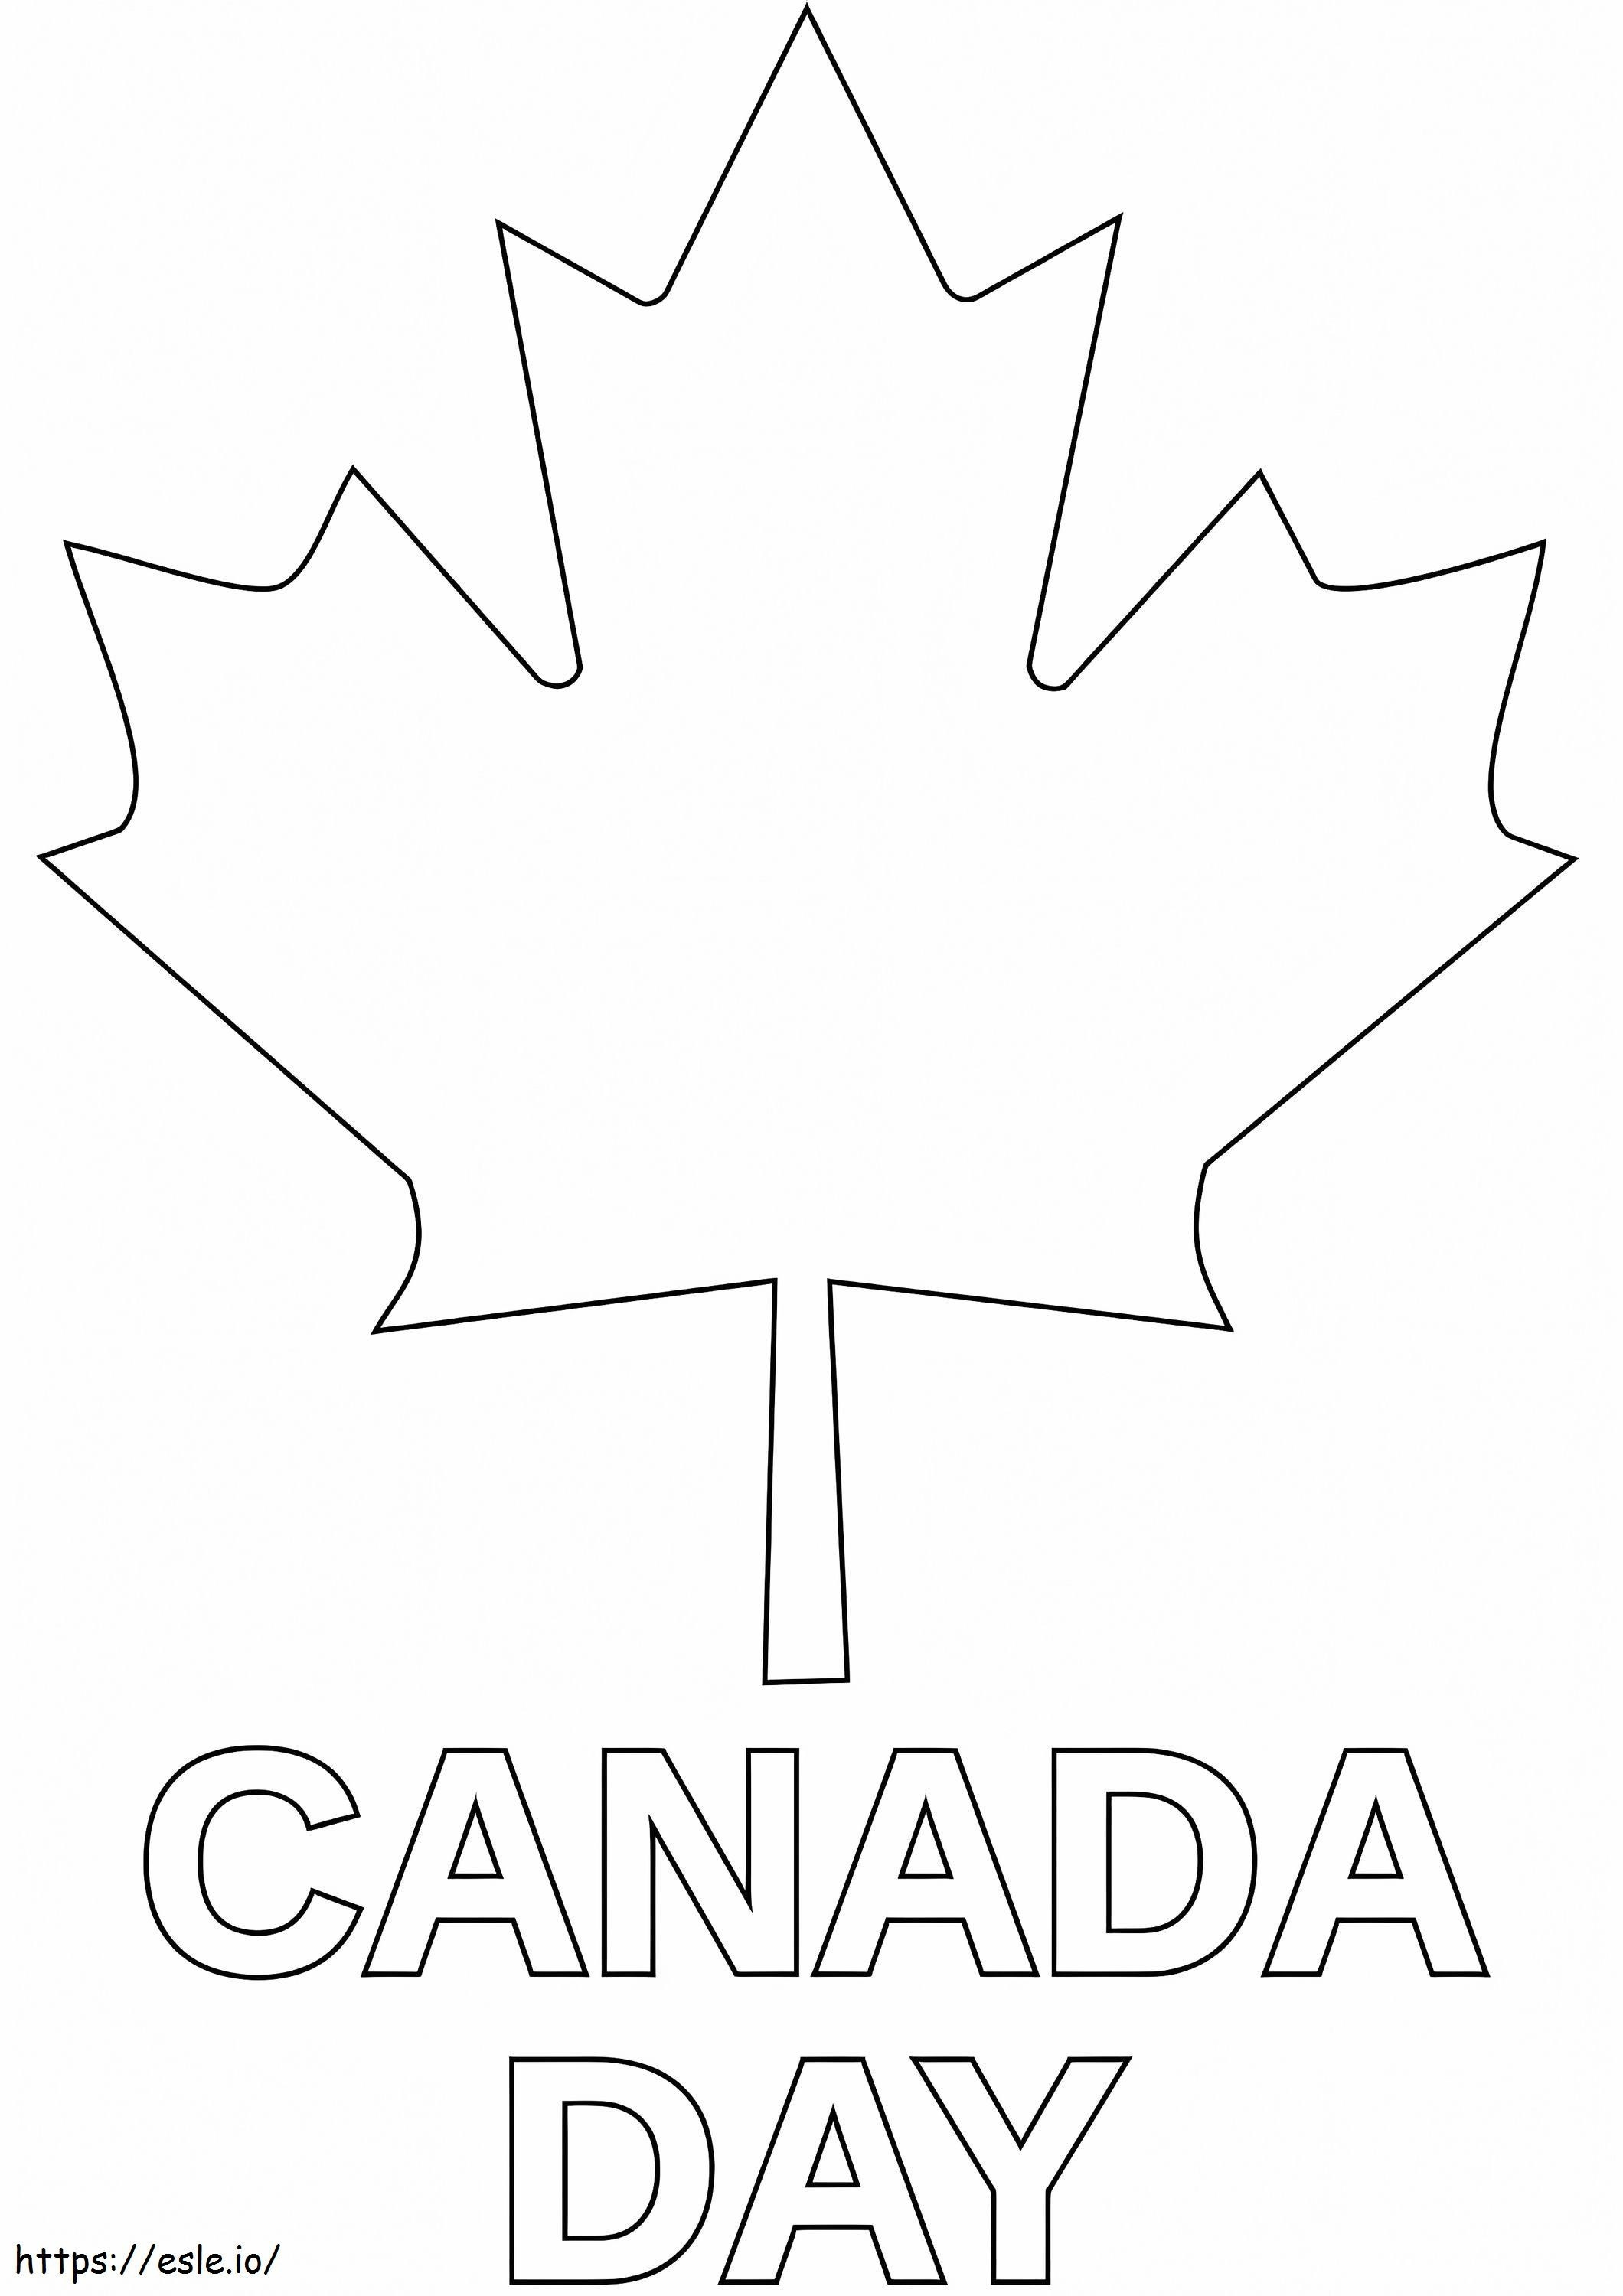 Canada Day 1 coloring page